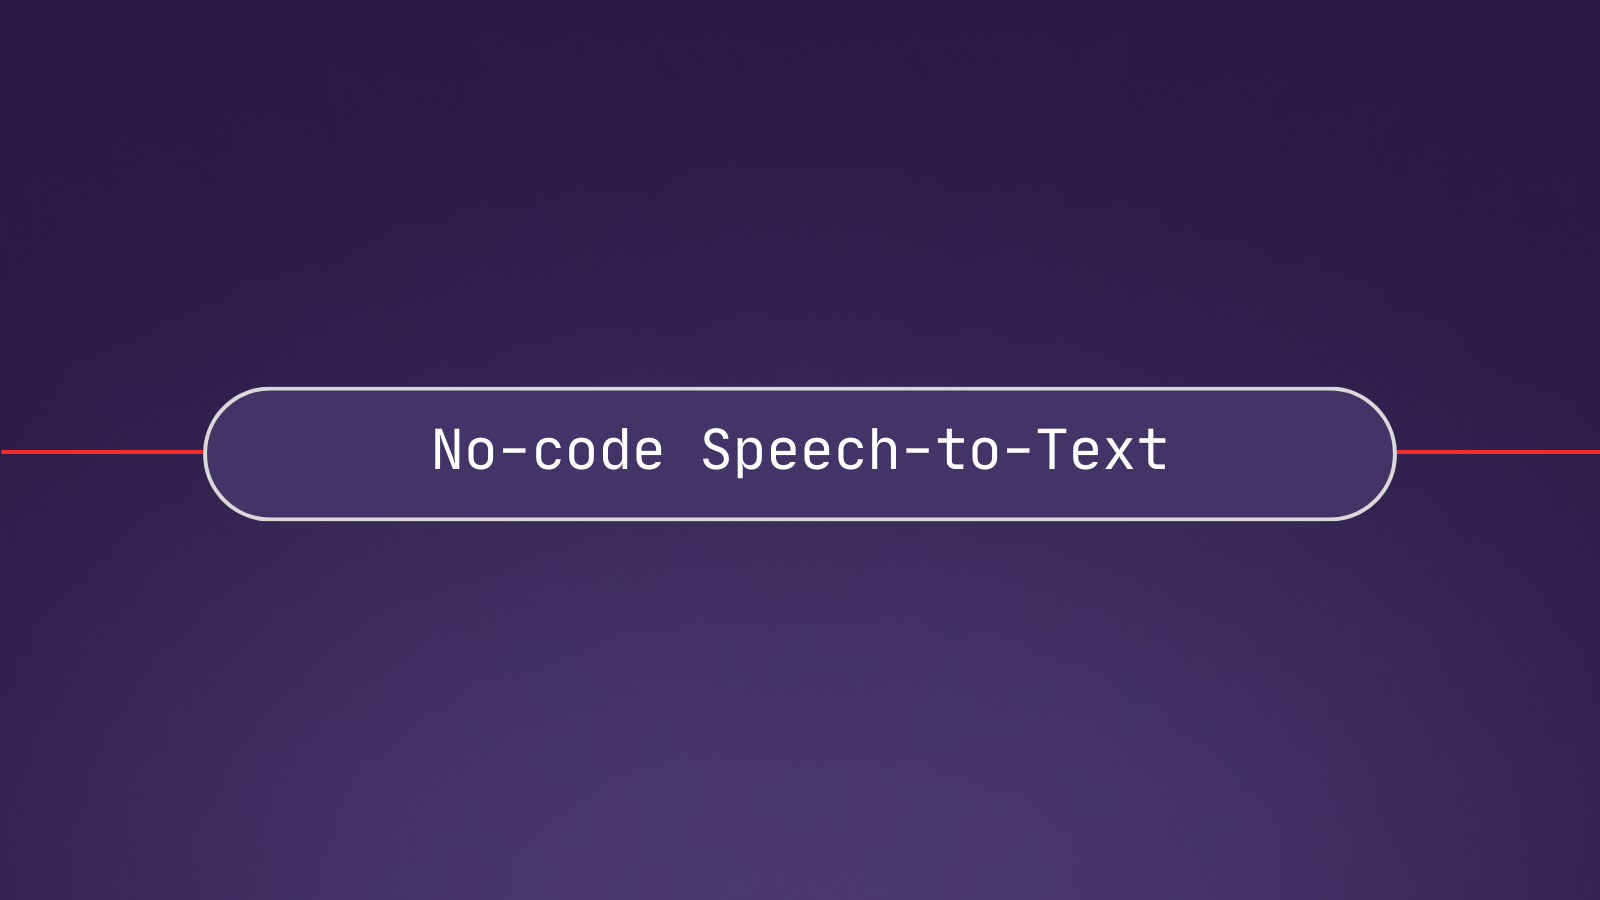 9 no-code and low-code ways to build AI-powered Speech-to-Text tools